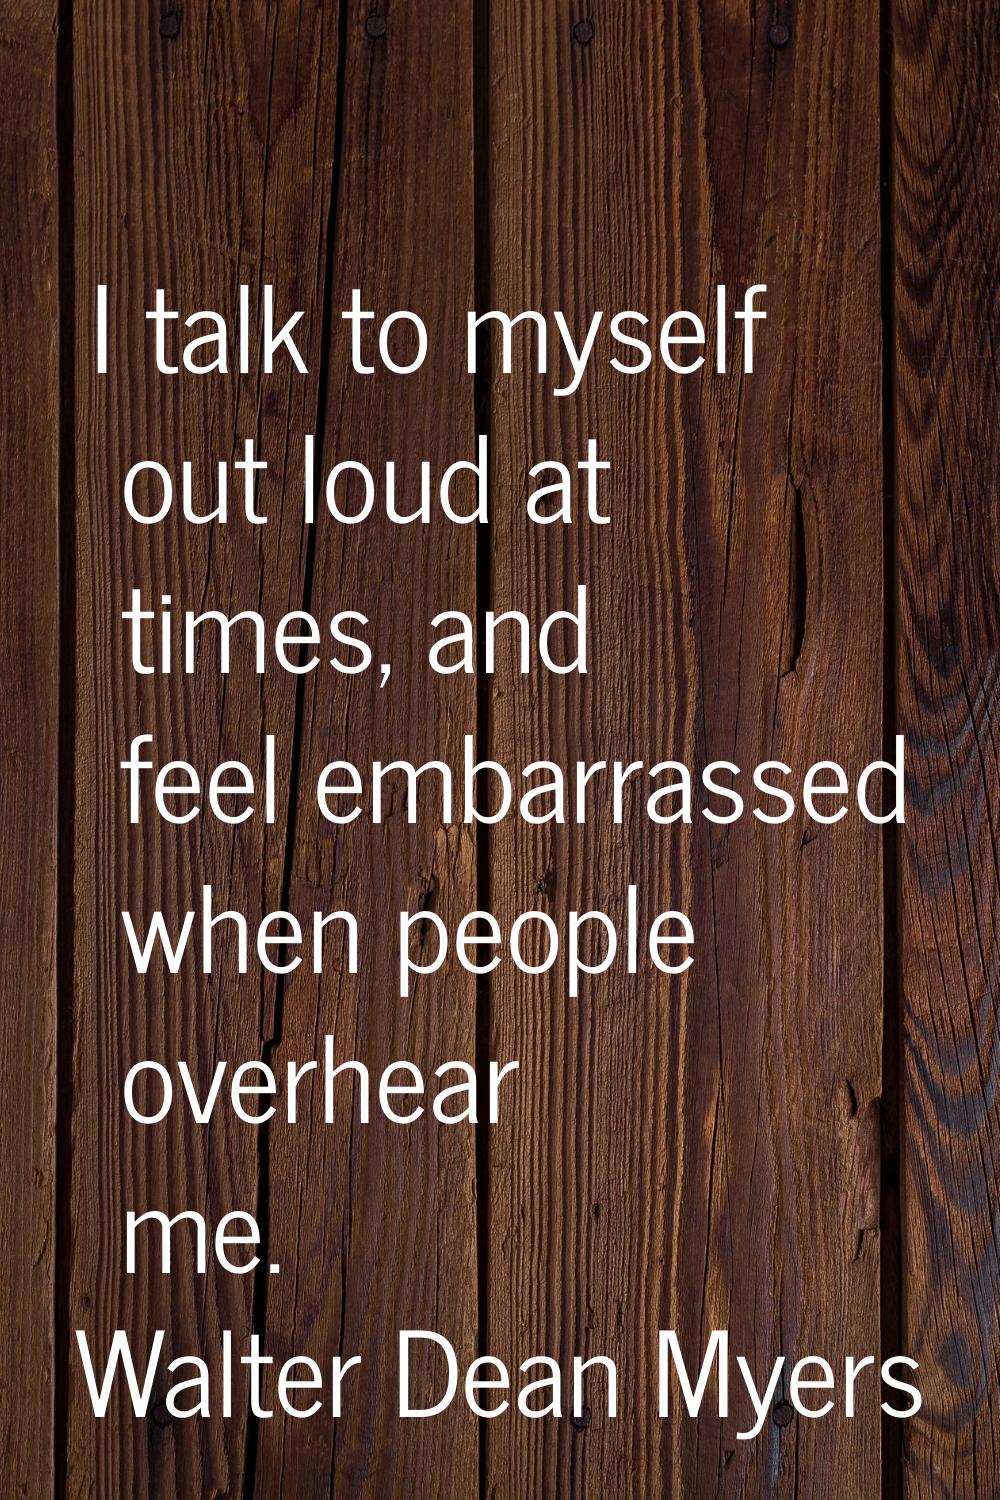 I talk to myself out loud at times, and feel embarrassed when people overhear me.